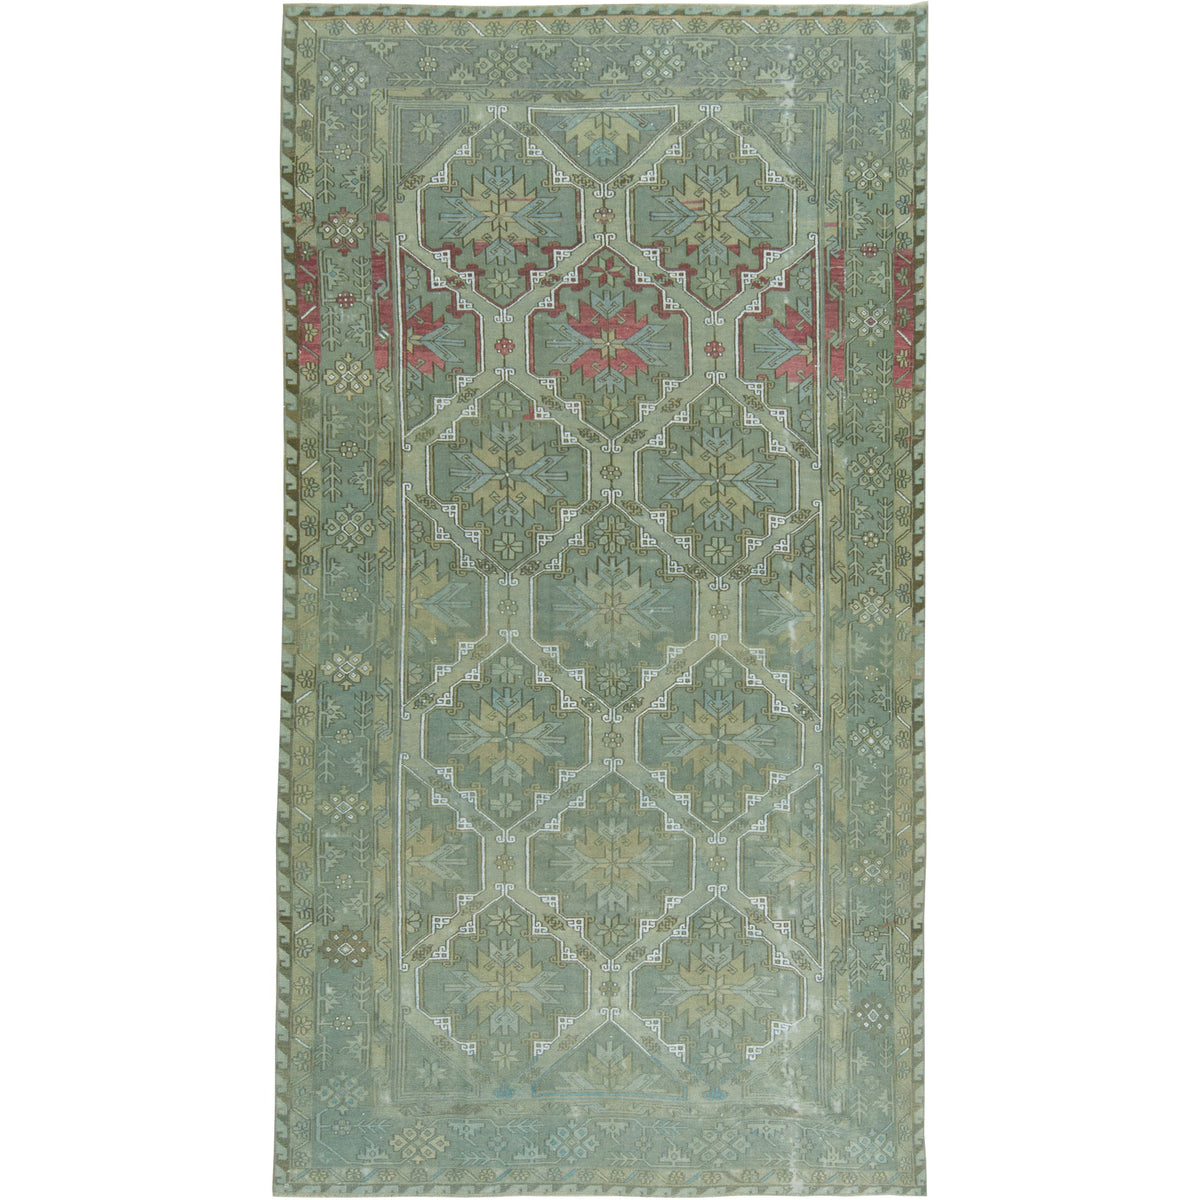 Kylie - A Green Haven of Persian Artistry | Kuden Rugs